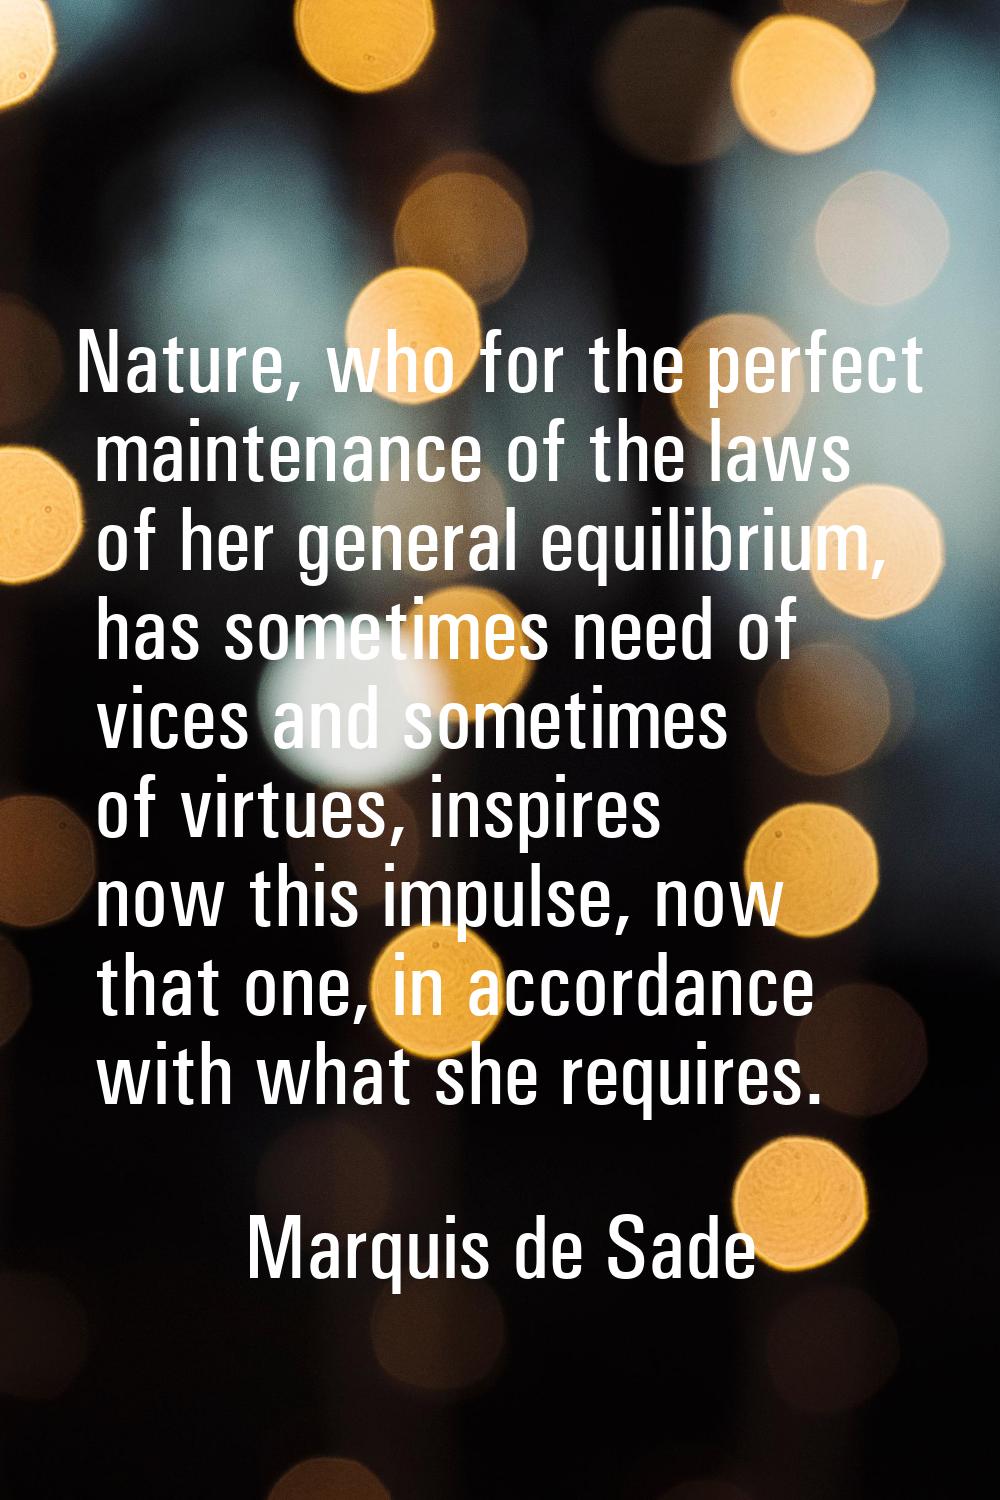 Nature, who for the perfect maintenance of the laws of her general equilibrium, has sometimes need 